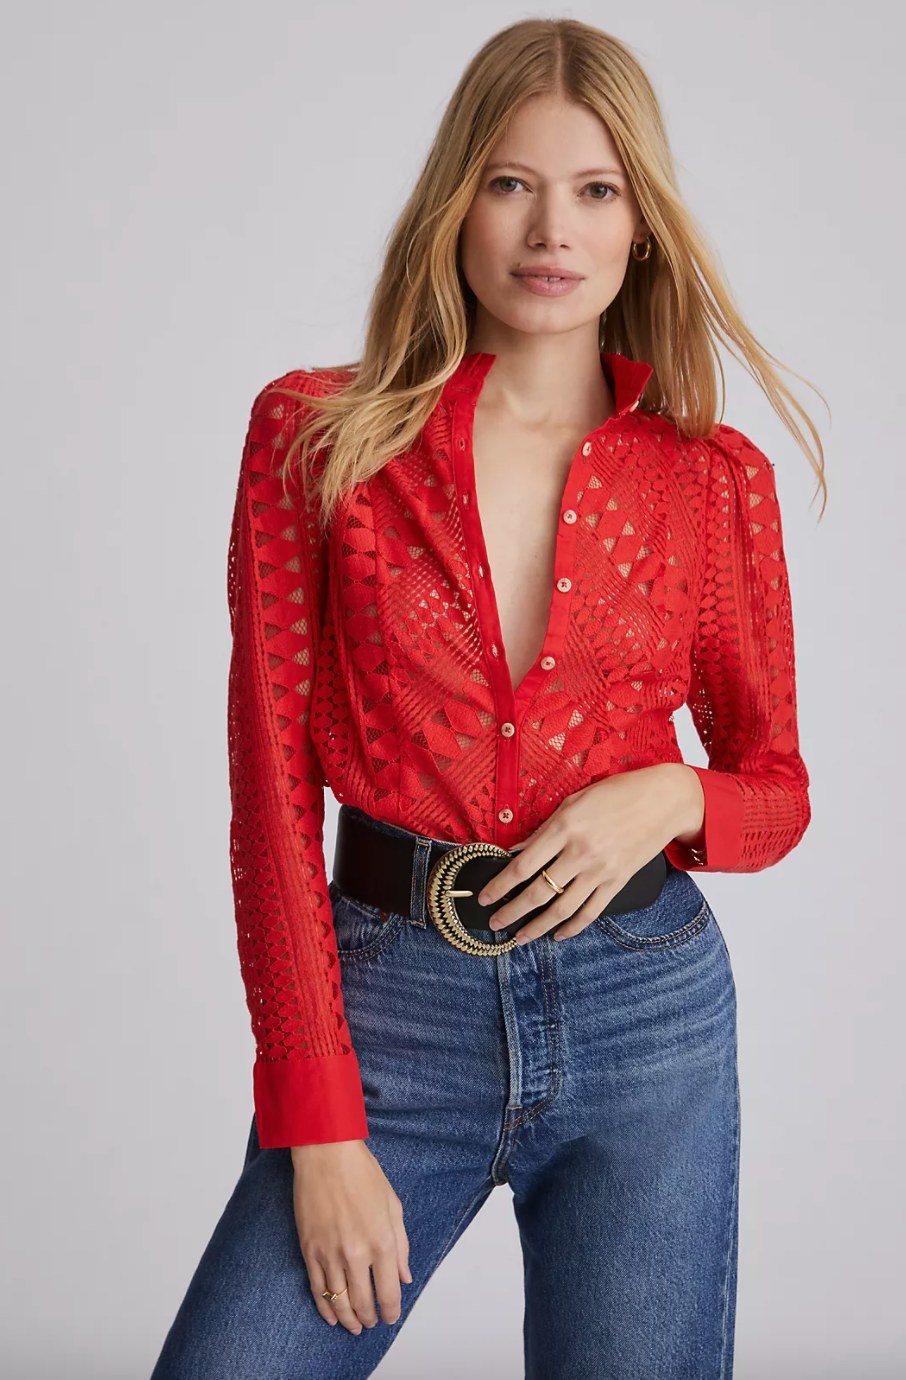 The red lace button-down shirt